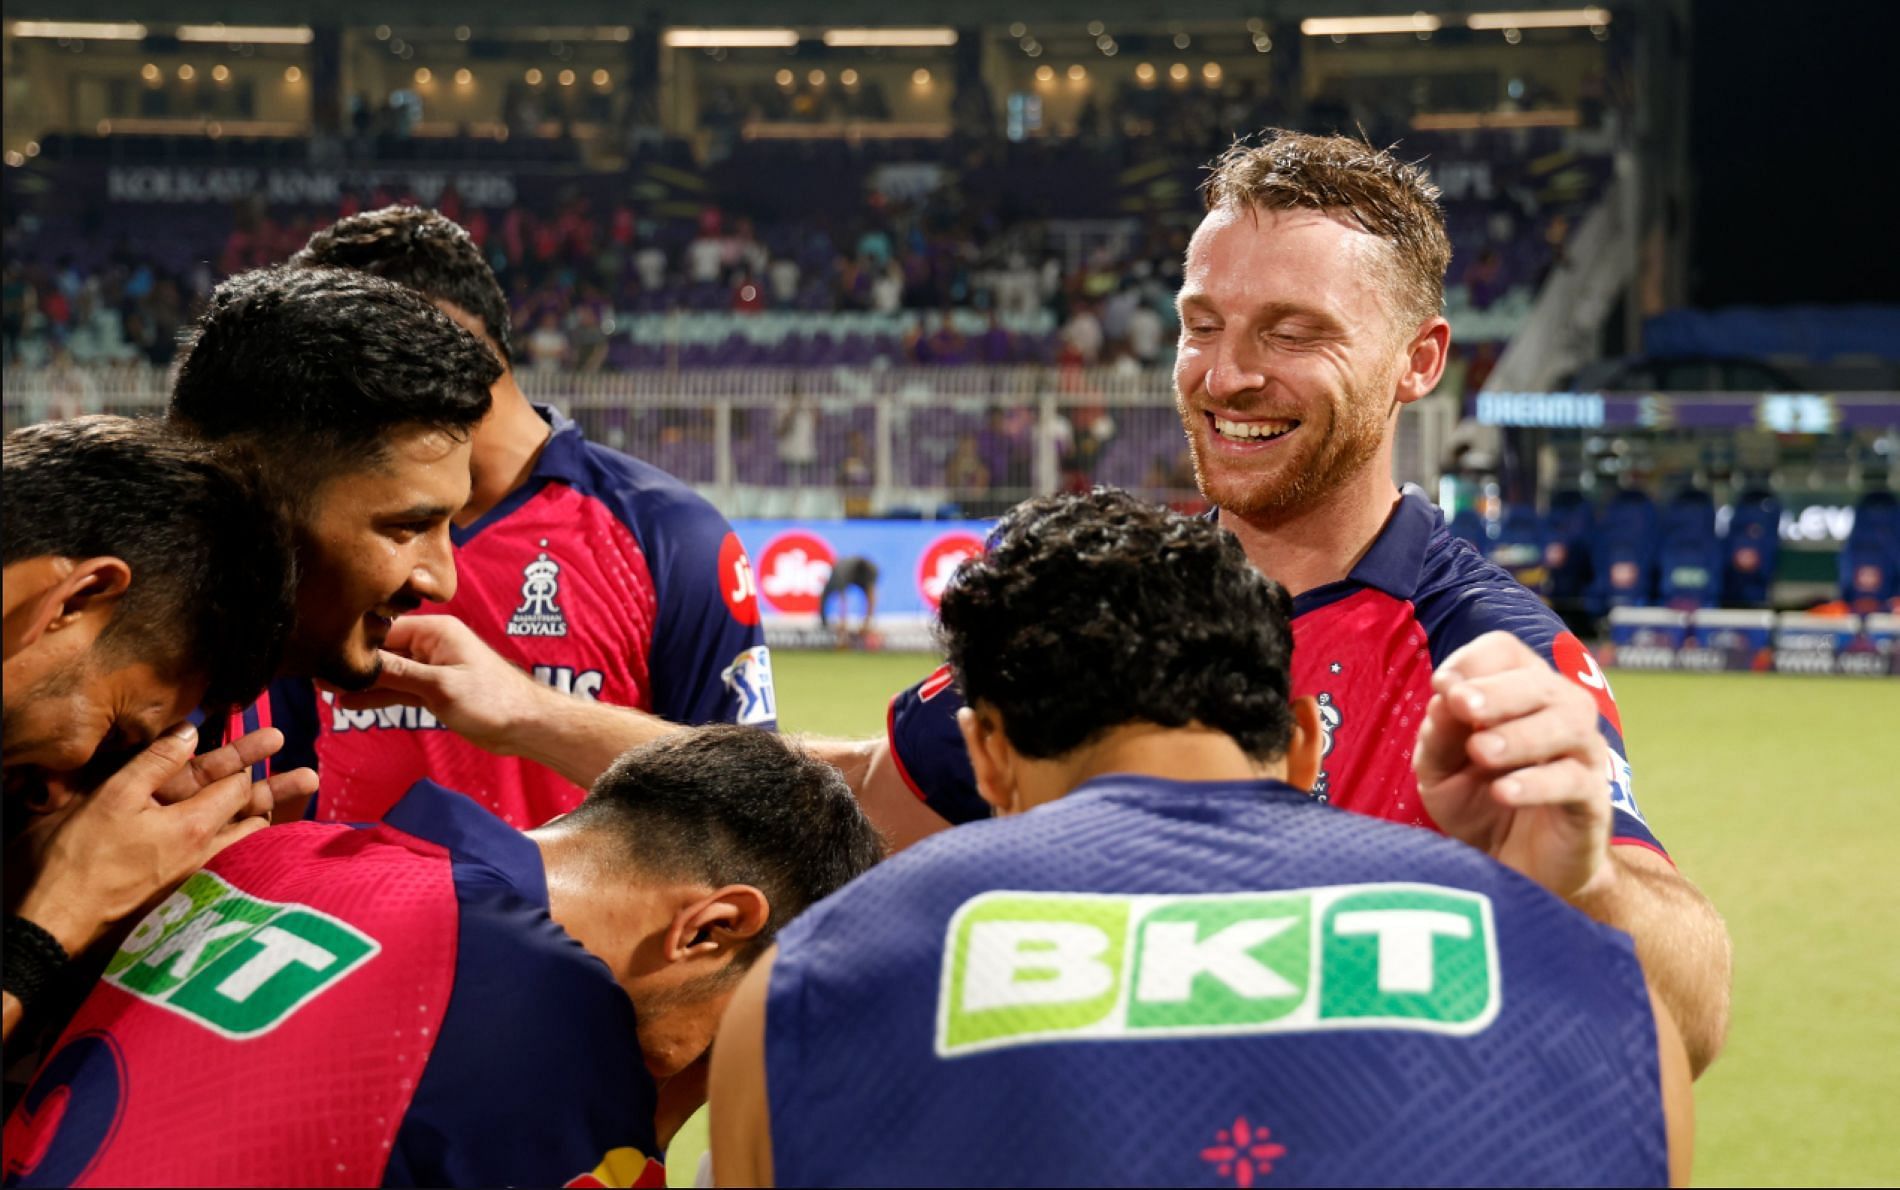 Buttler had his RR teammates in awe after pulling off a miraculous run-chase [Credit: IPL Twitter handle]